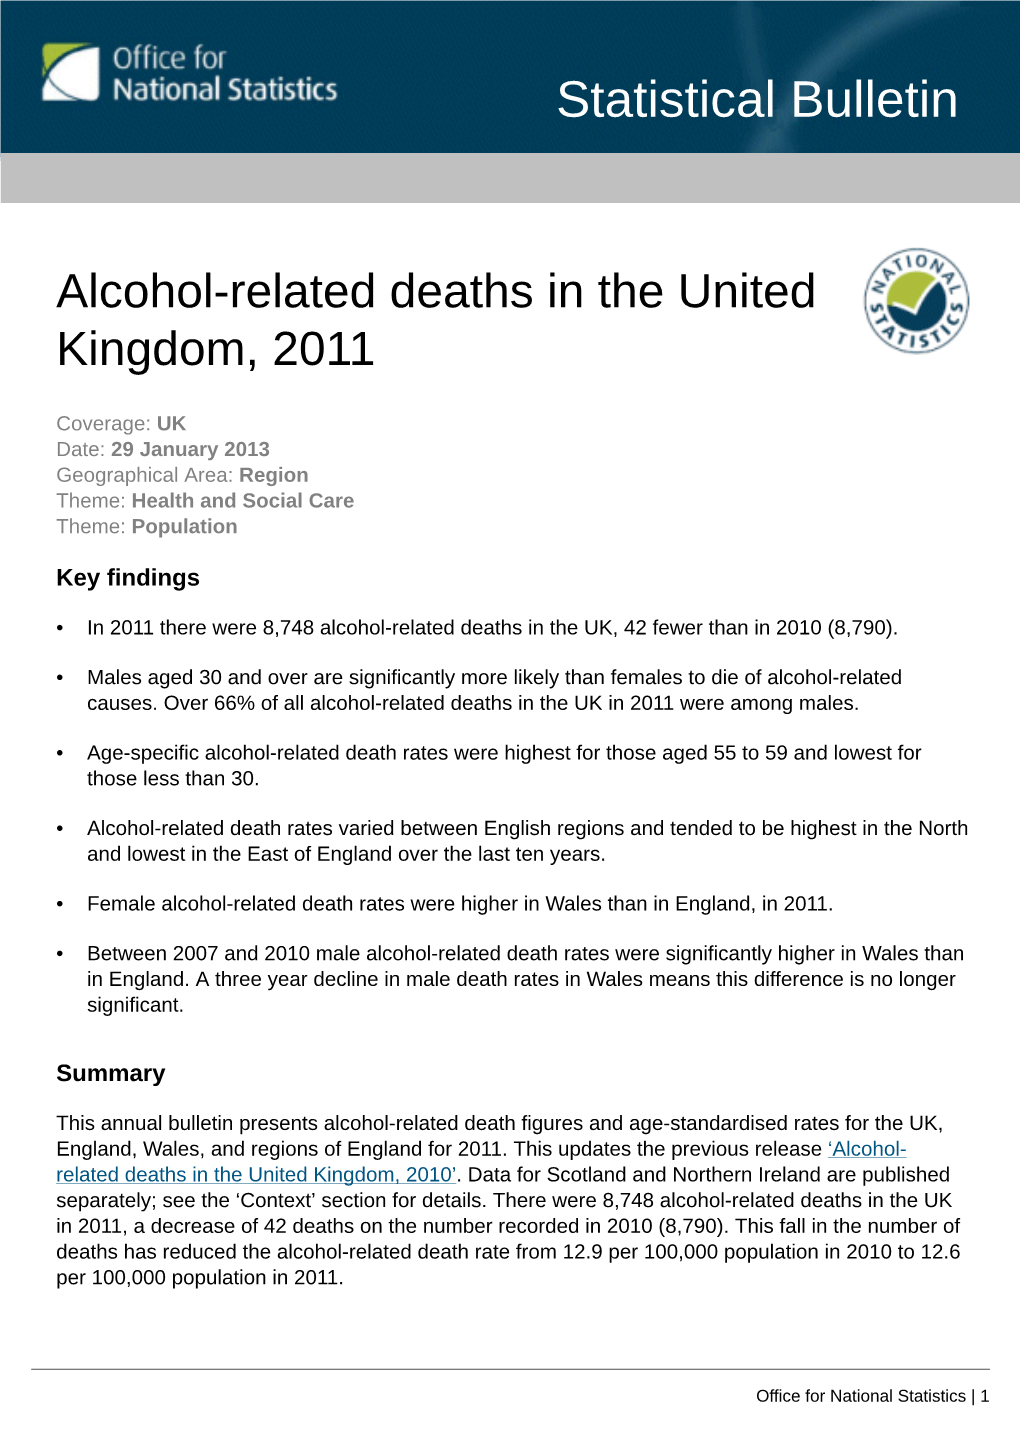 Statistical Bulletin for Alcohol-Related Deaths in the UK